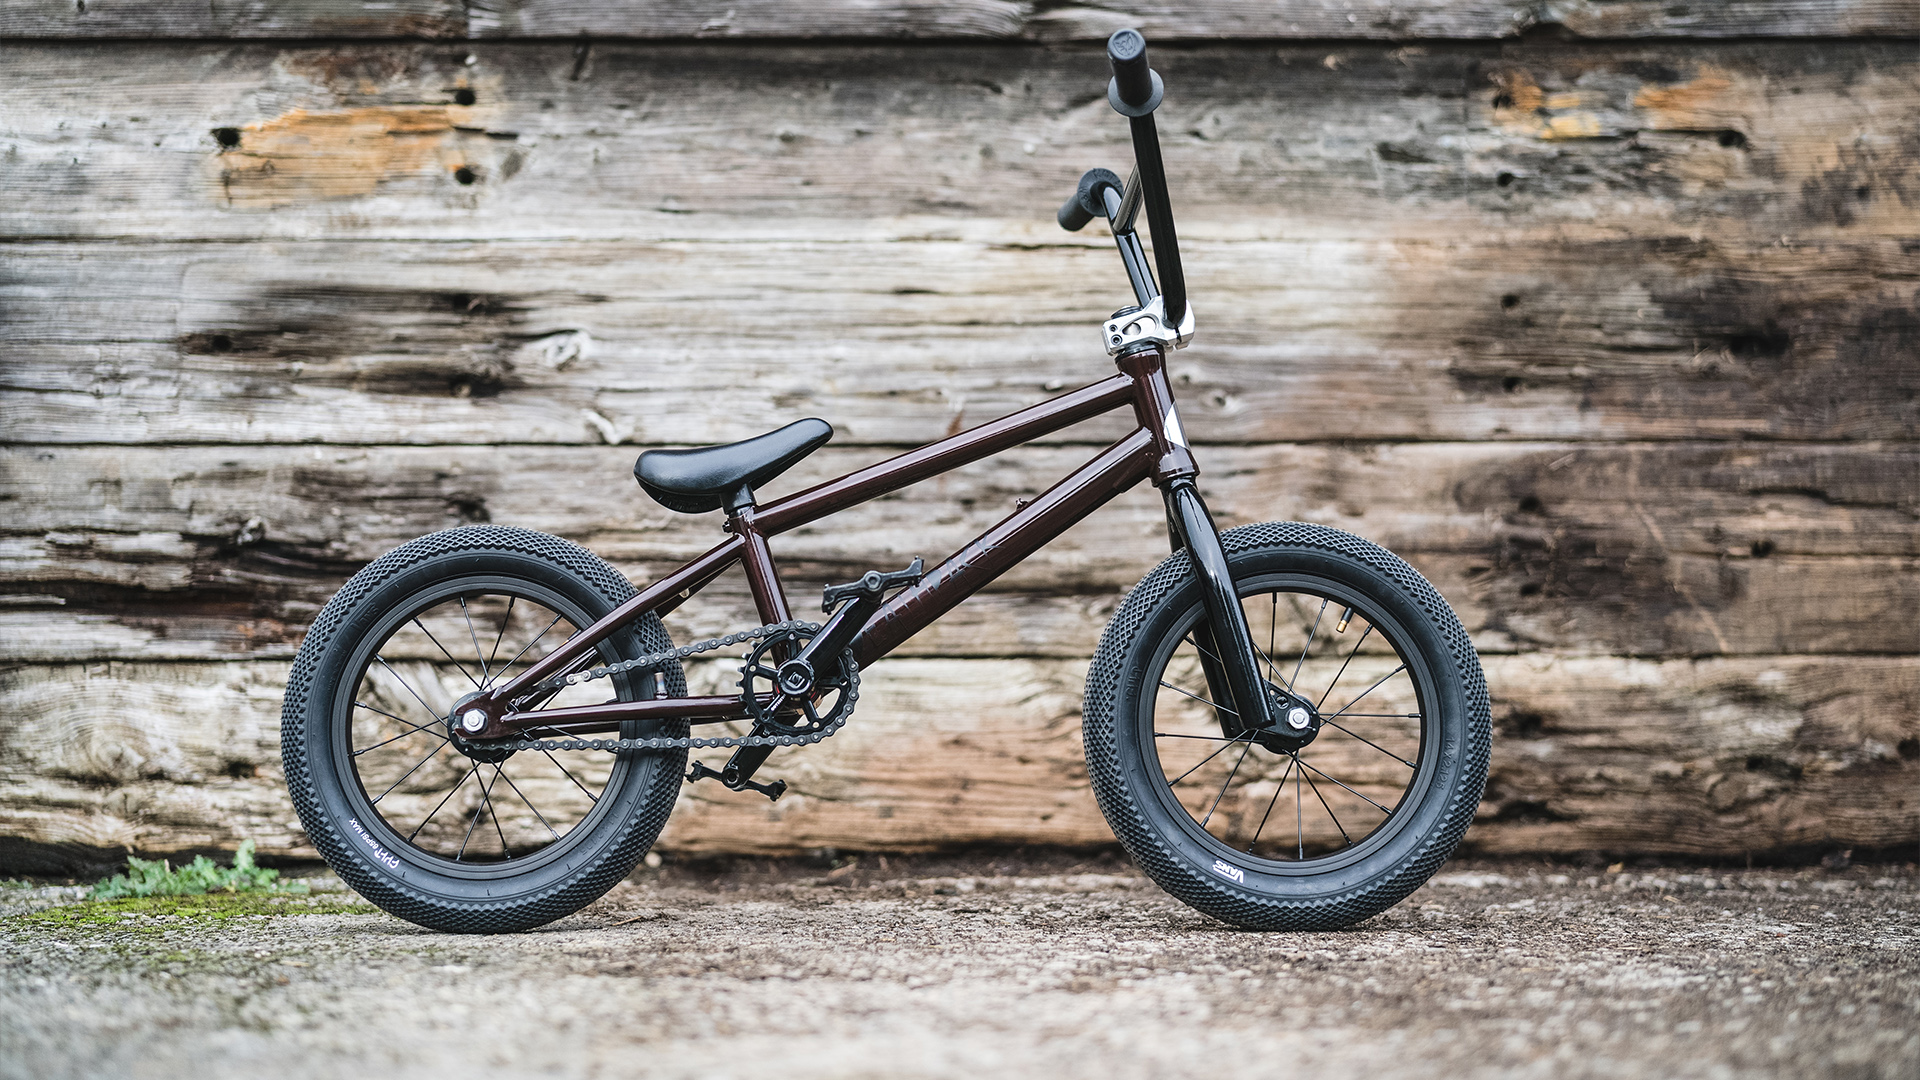 Possibly the best 14" BMX in existence